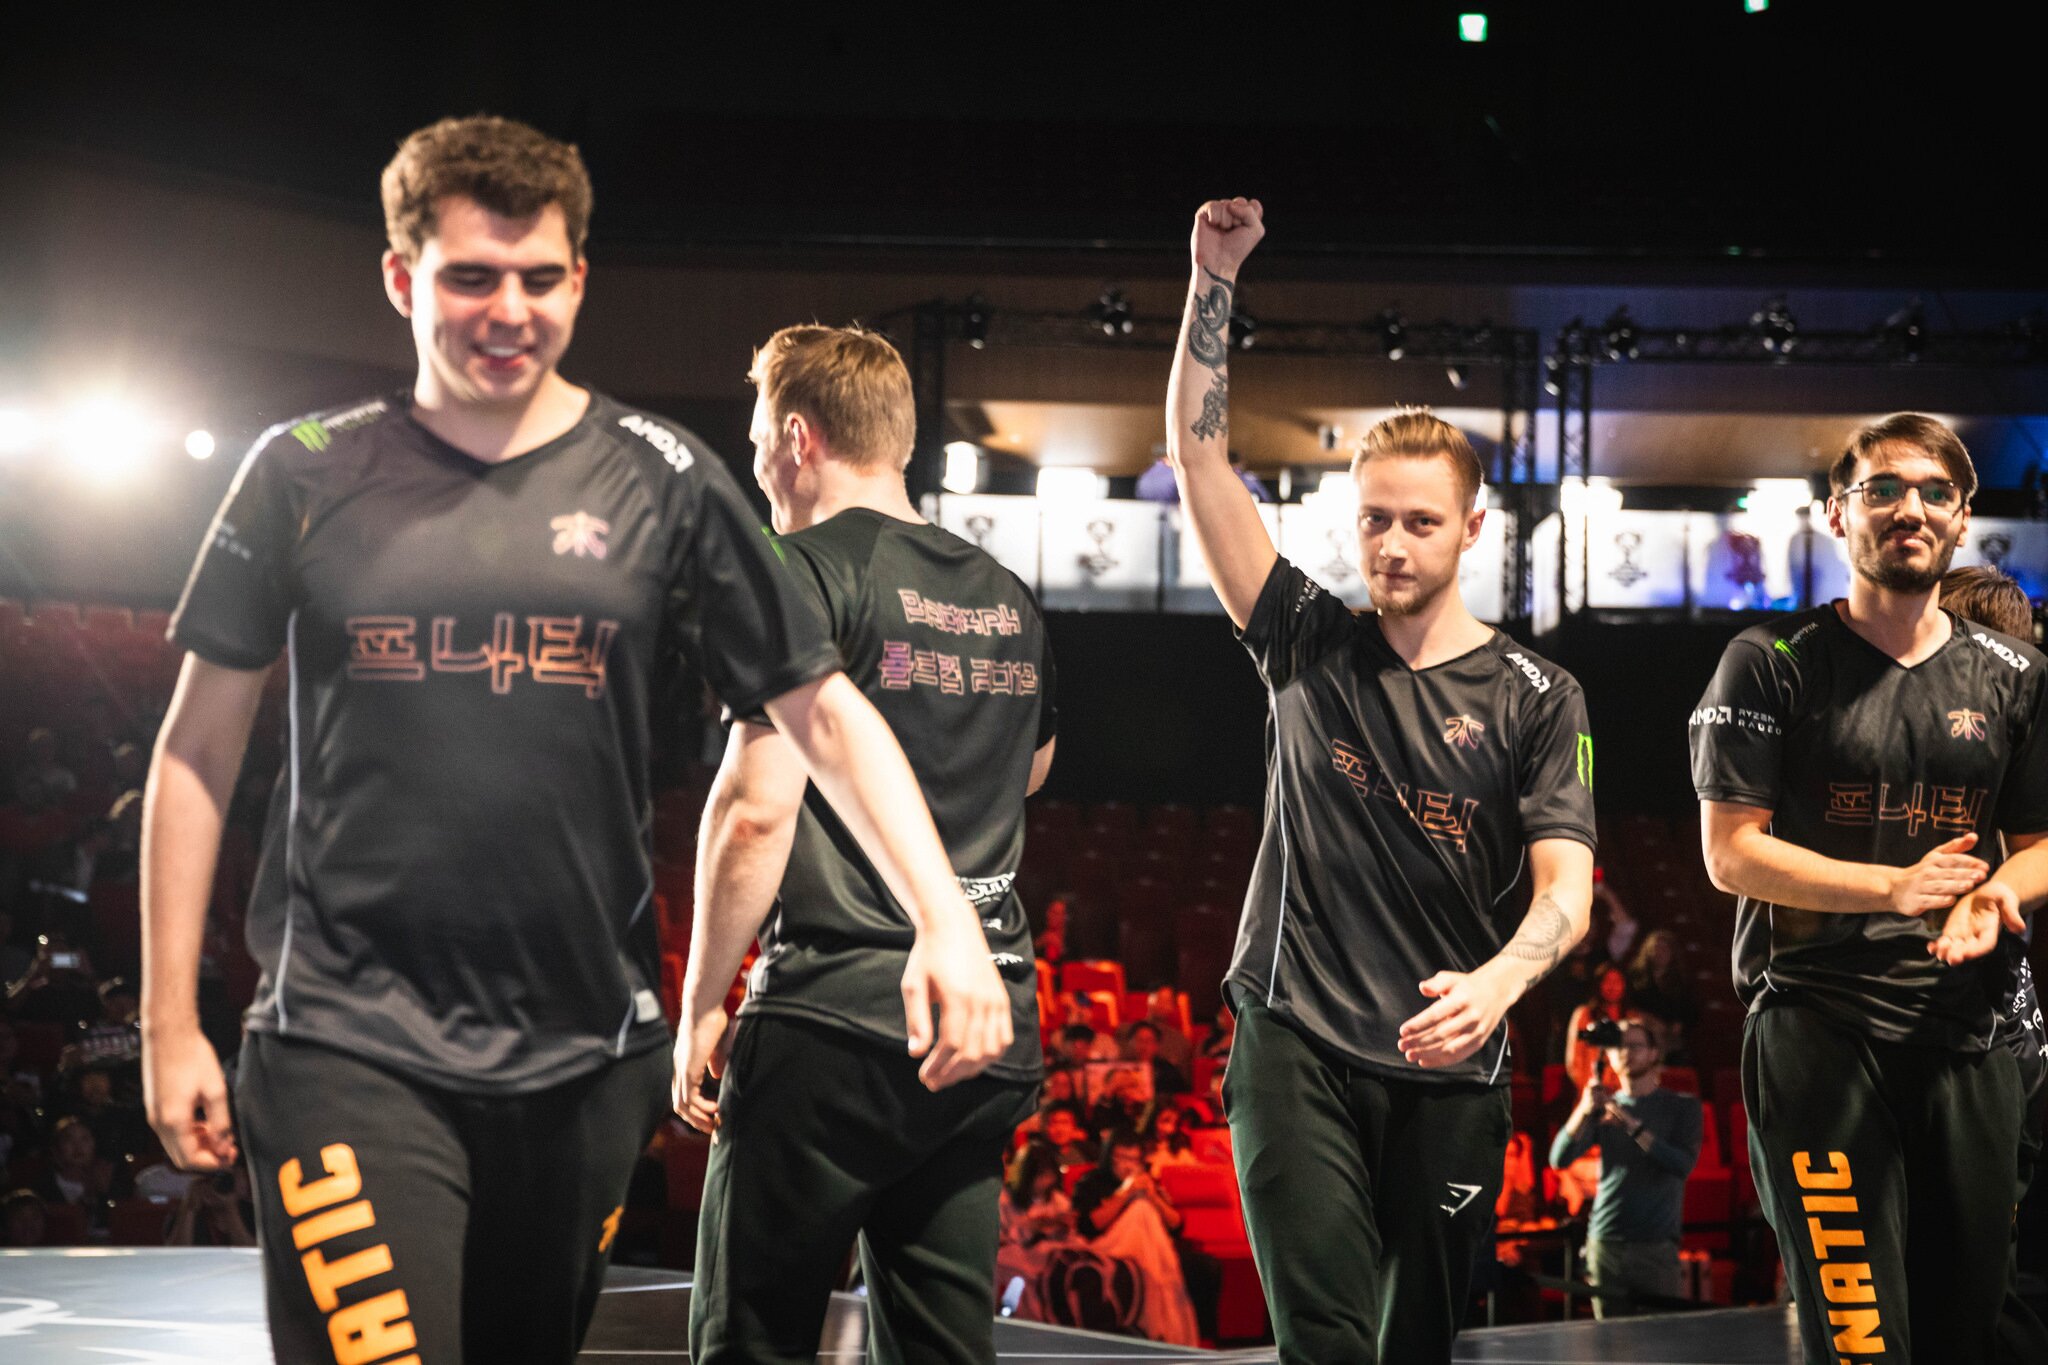 Rekkles and Fnatic put on a dominant performance during the final day of the group stages.